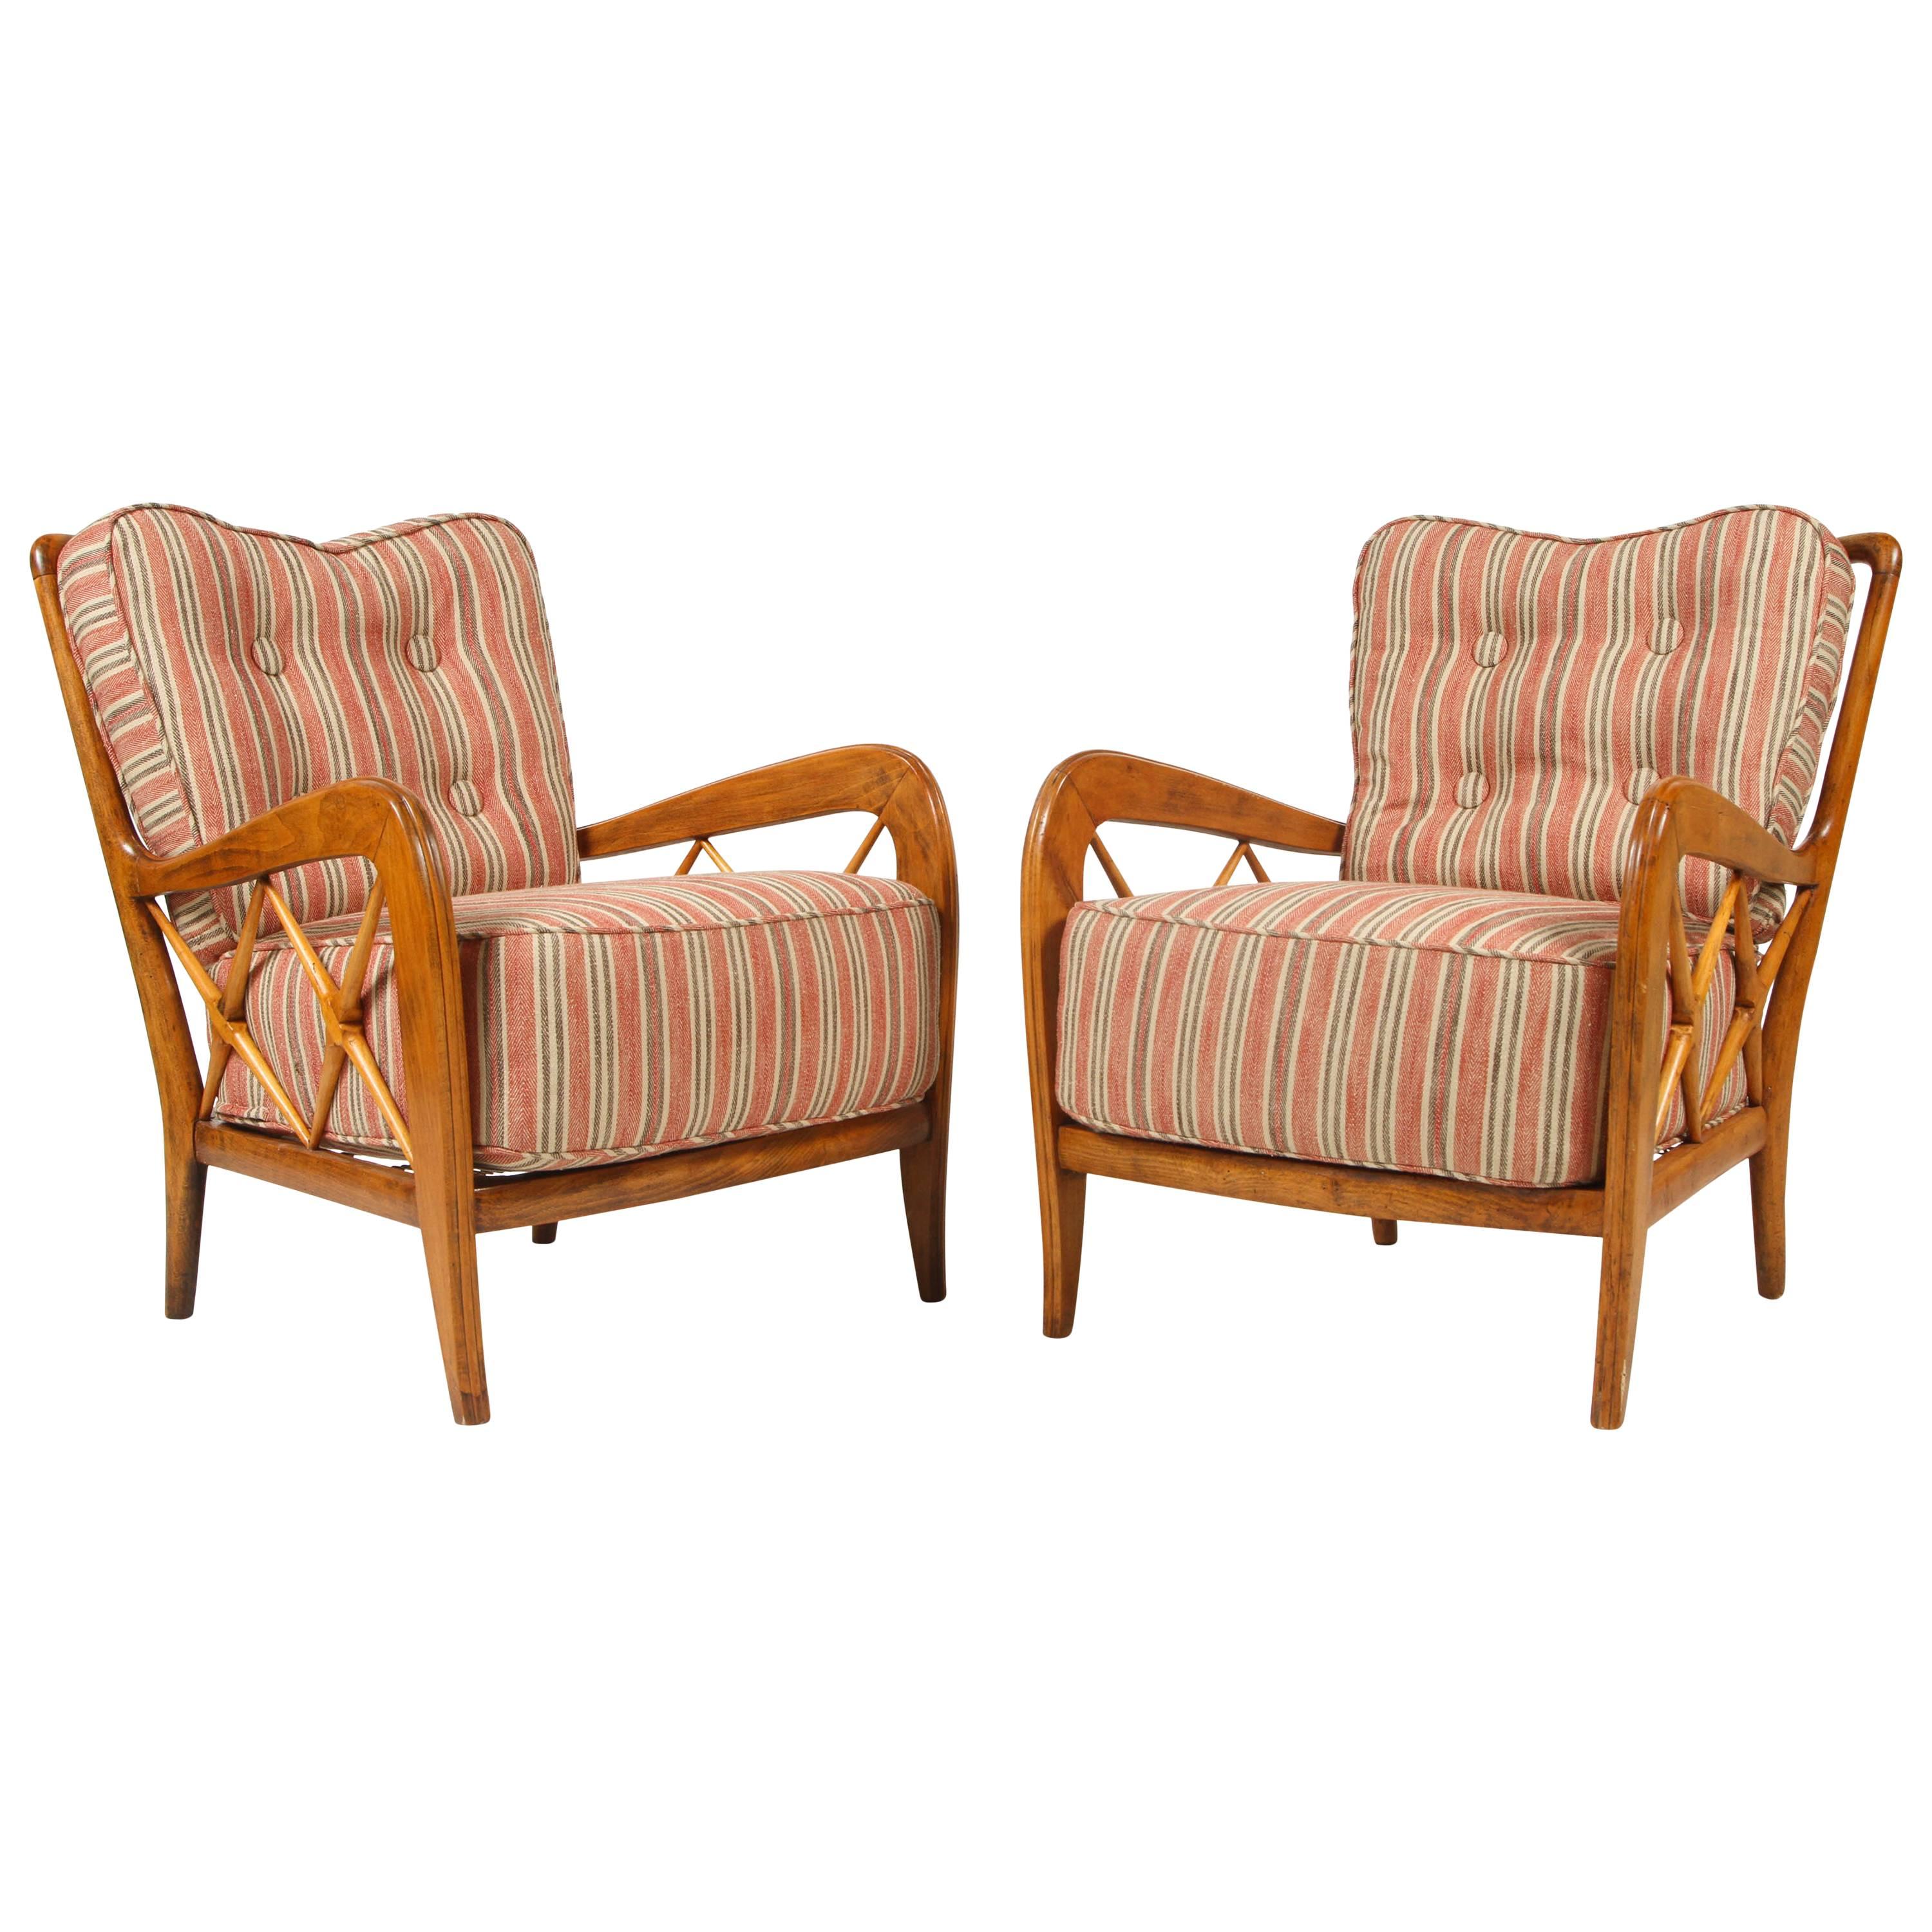 Pair of Gio Ponti Style Spindle Chairs